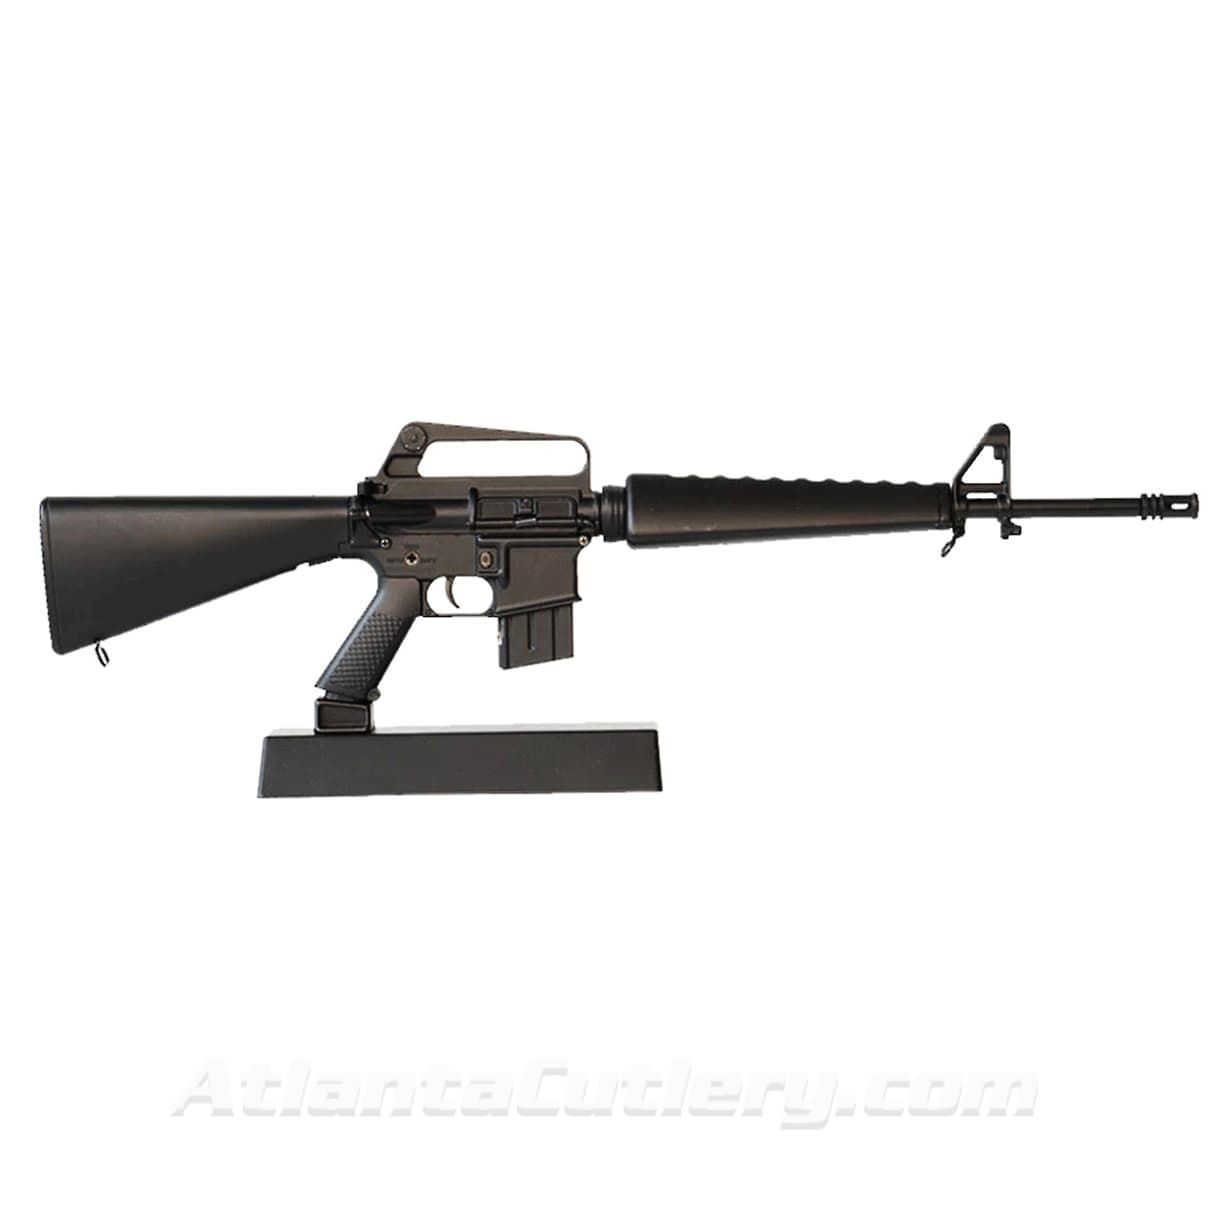 M16 A1 Fugazi miniature die cast metal 1:3 scale model with moving parts, non firing rounds and stand